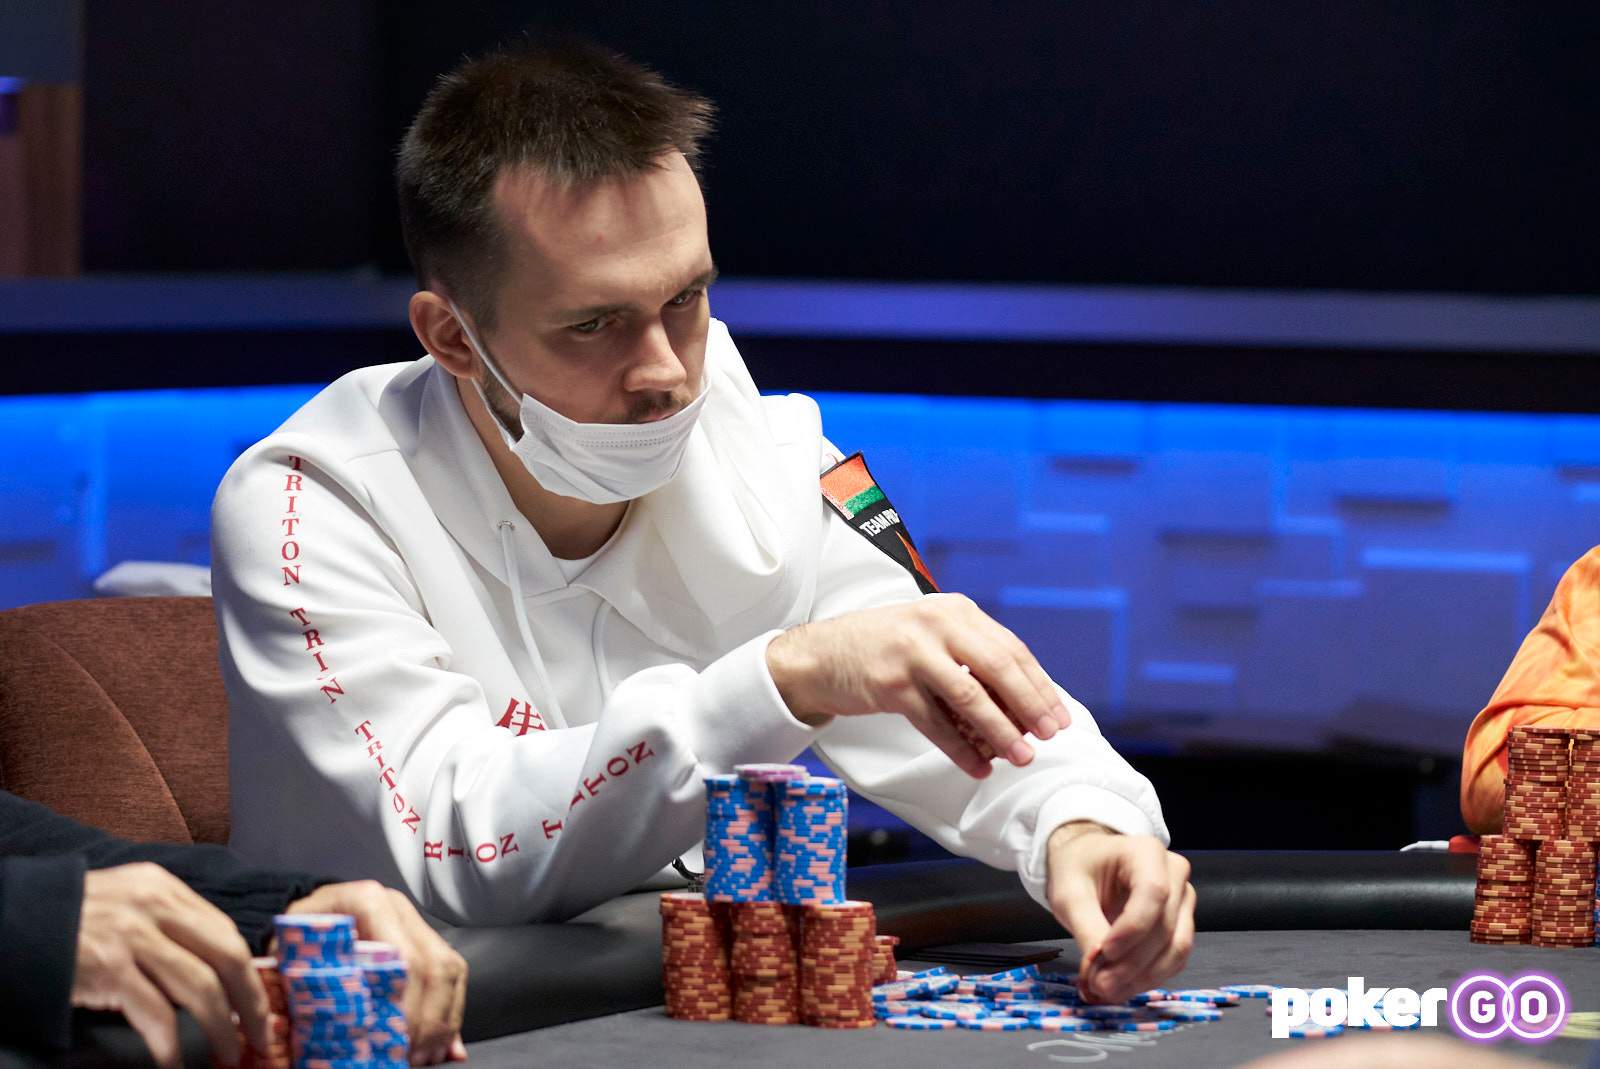 Mikita Badziakouski Leads The Final Table of Event #10: $25,000 No-Limit Hold'em